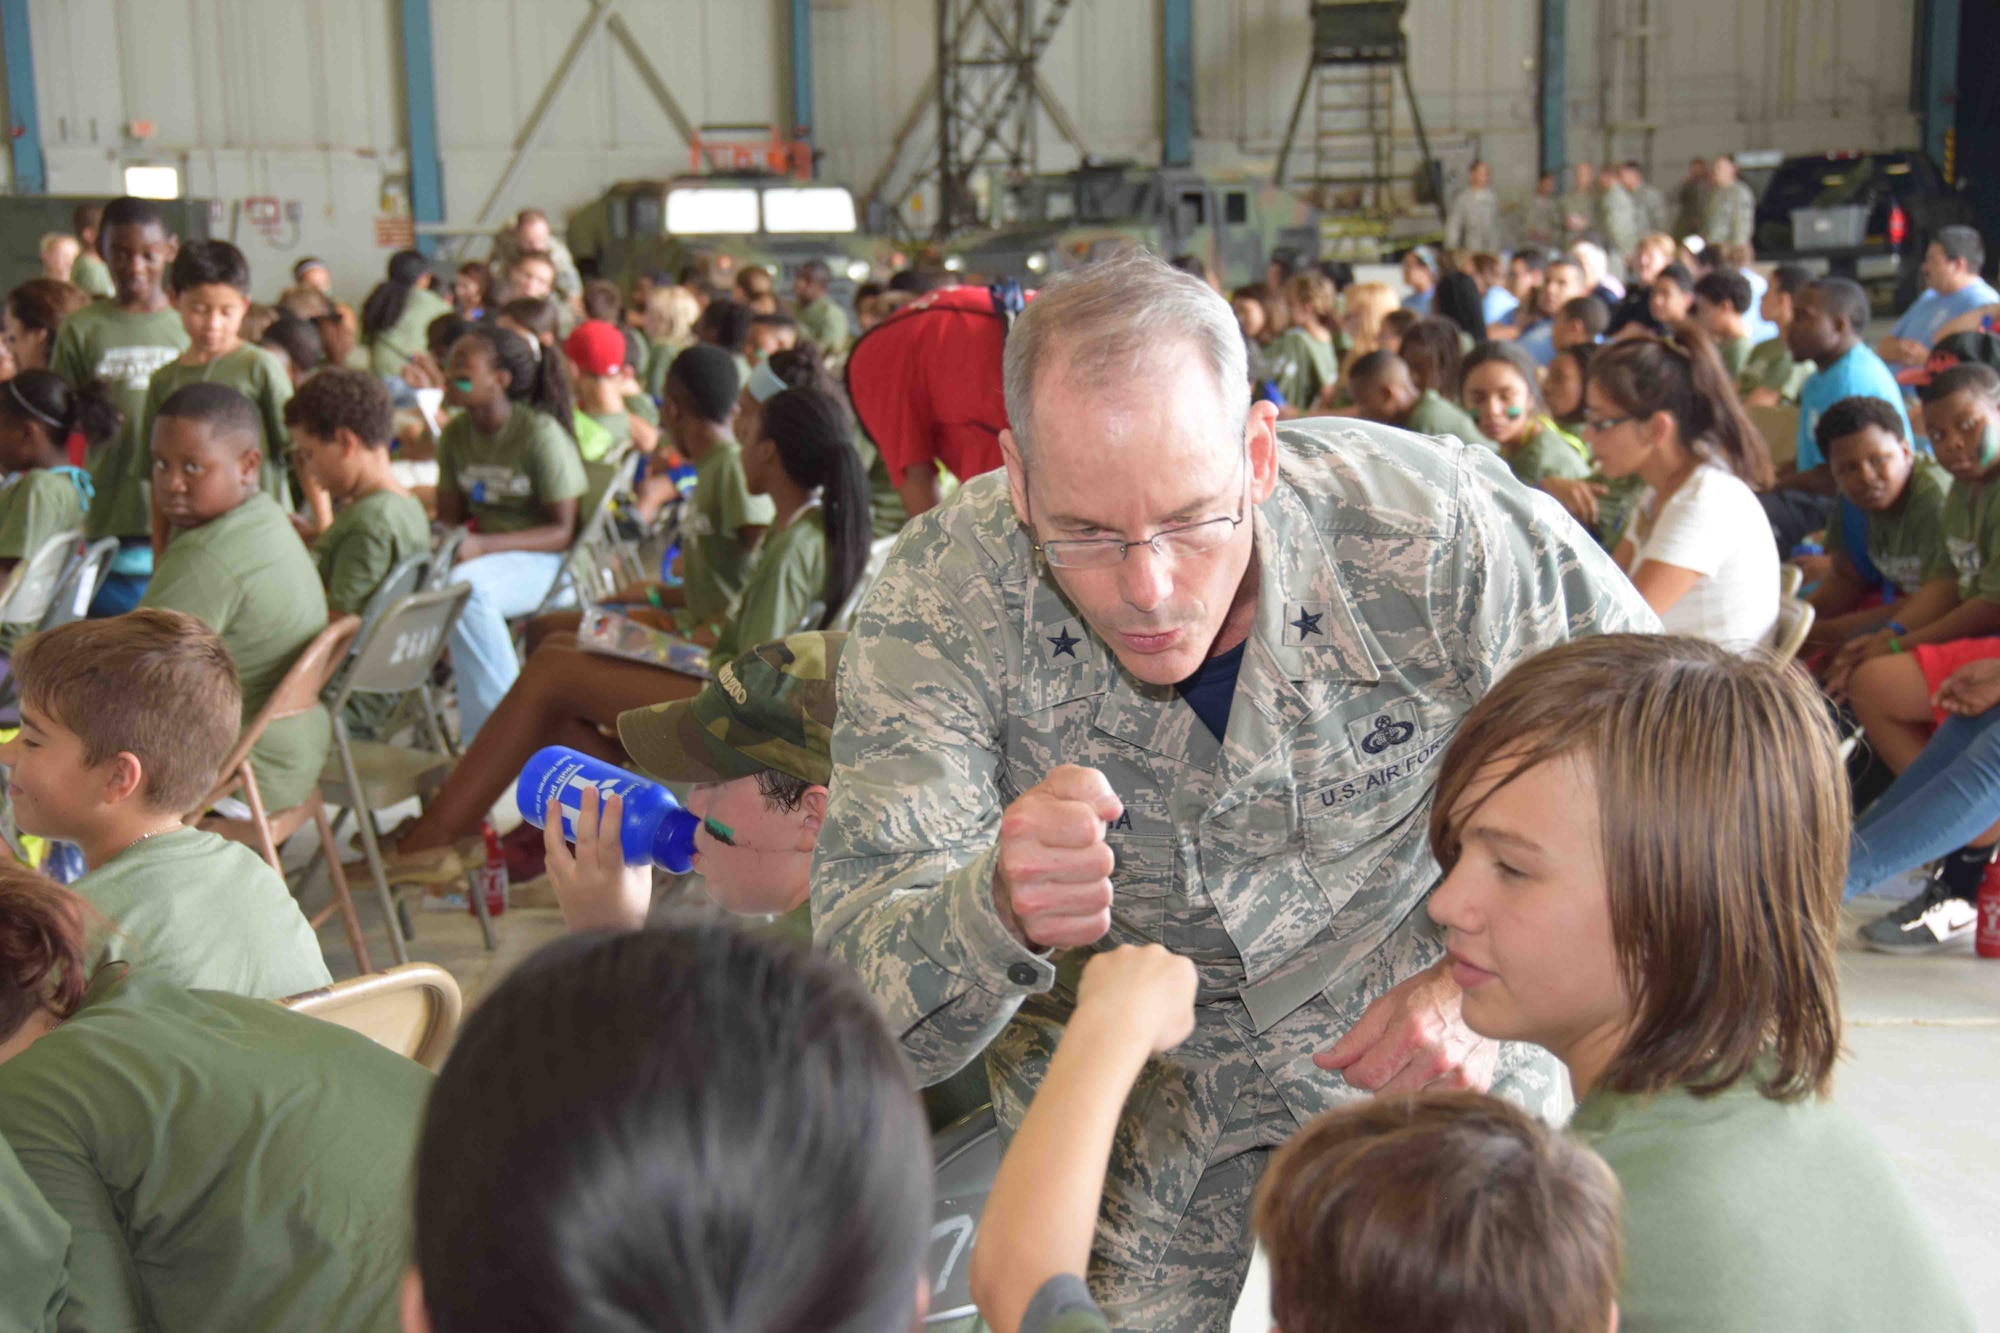 Brig. Gen. Robert La Brutta, 502nd Air Base Wing and Joint Base San Antonio commander, made the closing remarks at Operation JET for almost 200 children at Joint Base San Antonio-Lackland, Texas, July 31, 2015. The general then left the stage to give high fives and shake hands to thank the children for supporting their parents when they deploy. (U.S. Air Force photo/Tech. Sgt. Carlos J. Trevino)